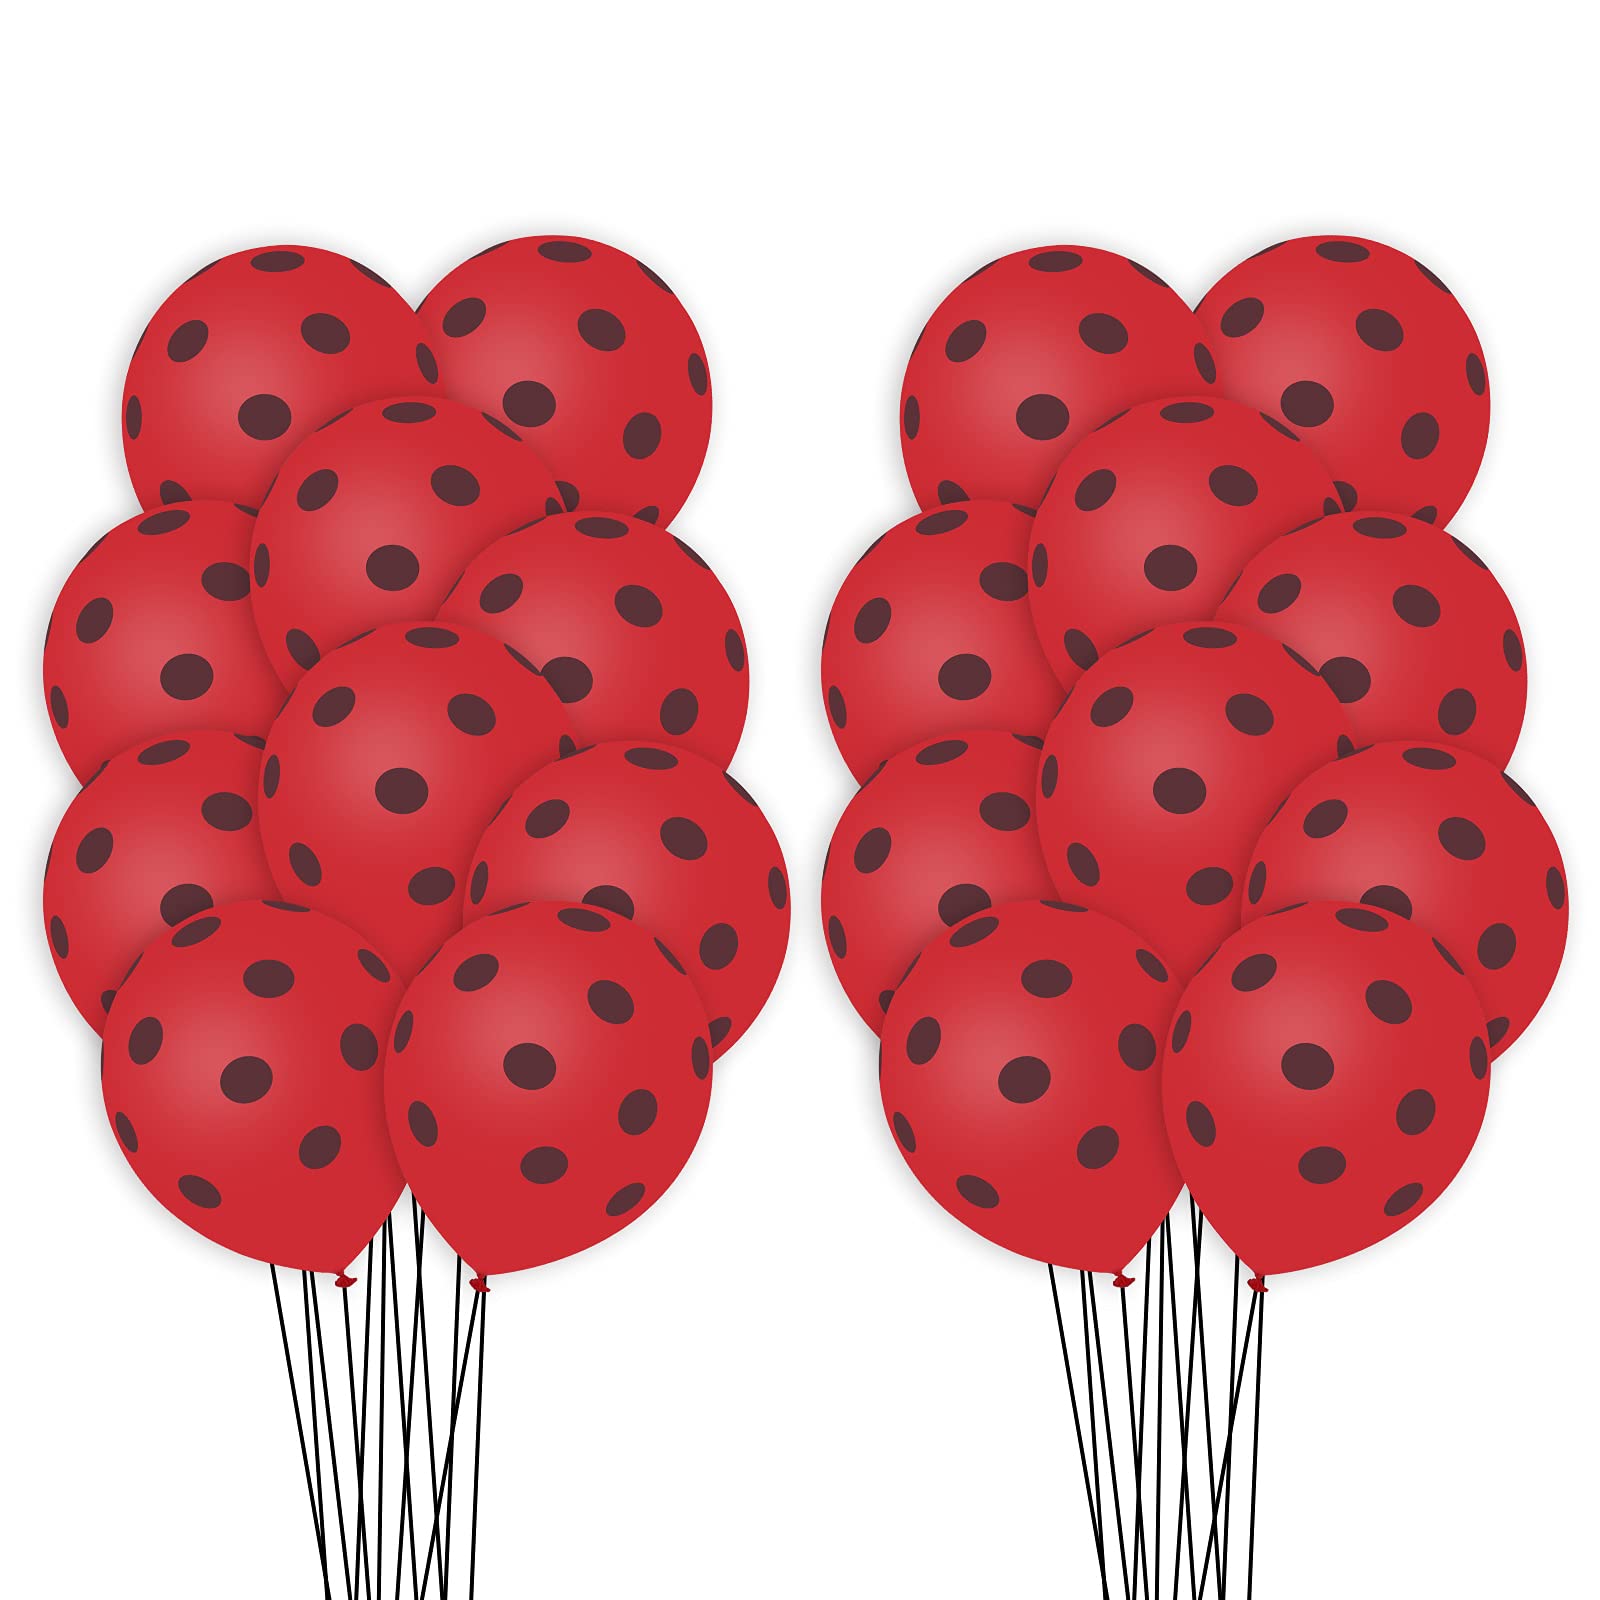 50 Pcs Ladybug Balloons Red Black Polka Dots Balloon 12 Inches Latex Party Balloon for Ladybug Theme Party Wedding Birthday Party Festival Decorations